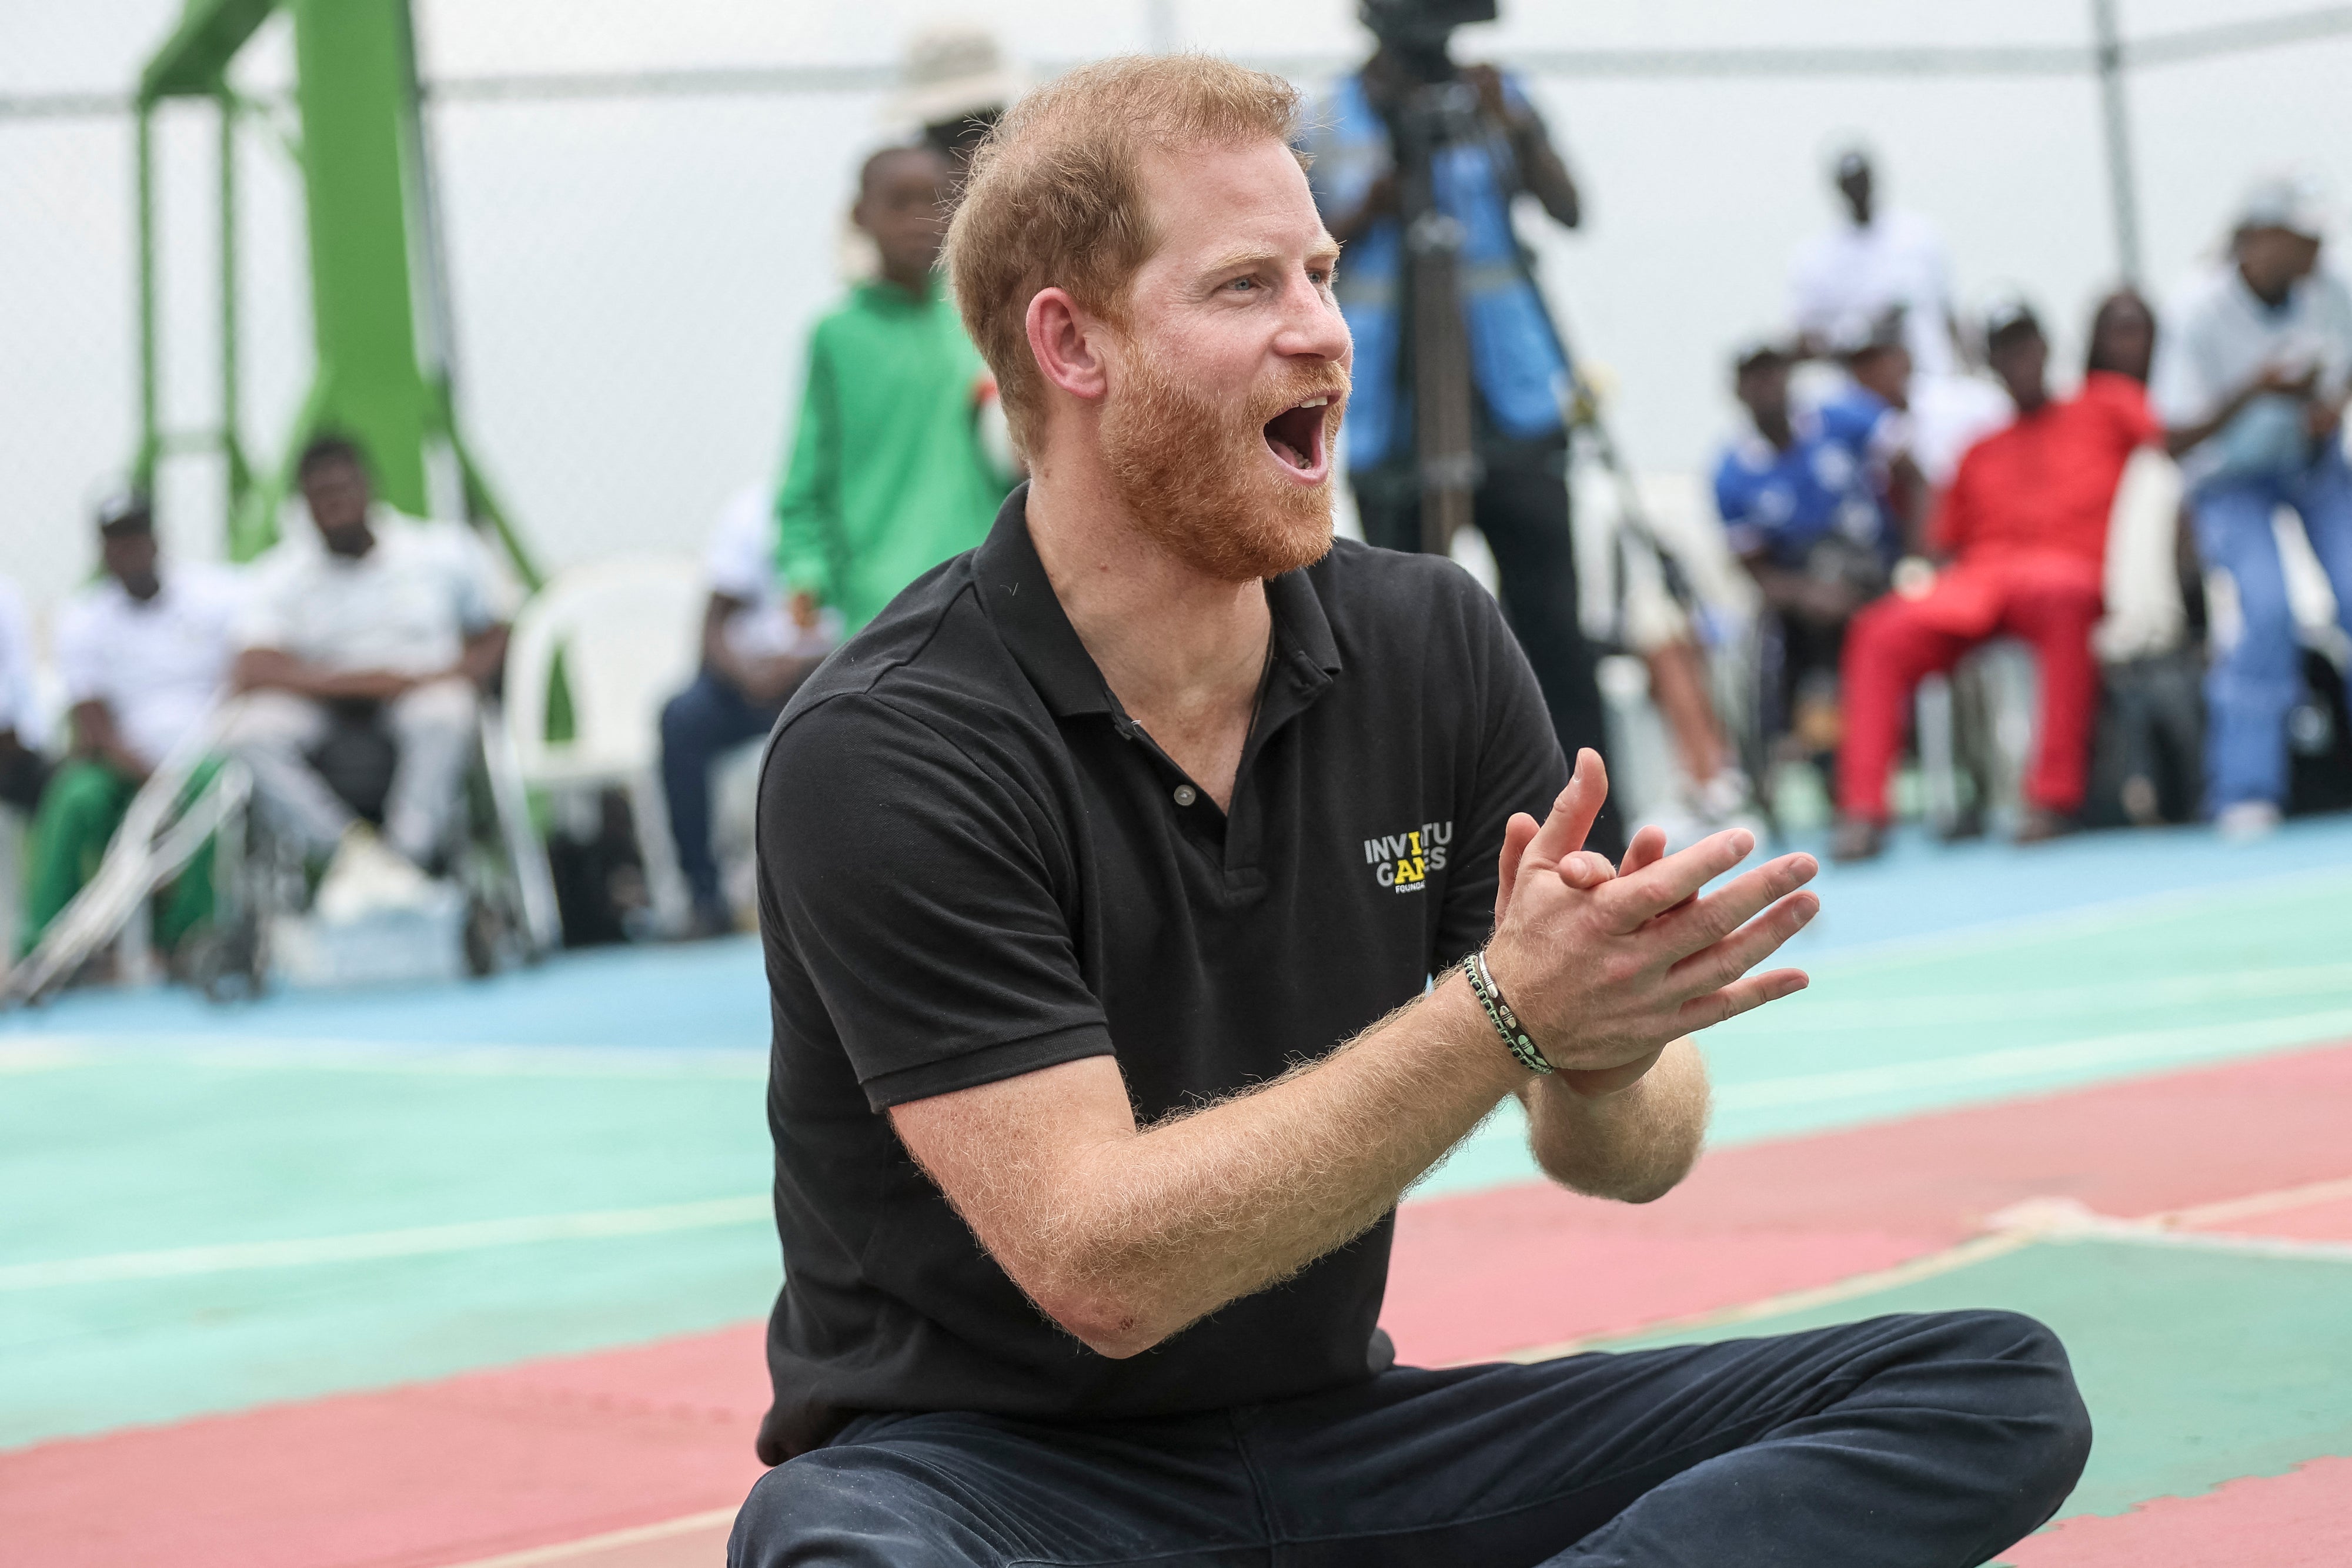 The Biden administration wants Prince Harry’s US visa application to remain private